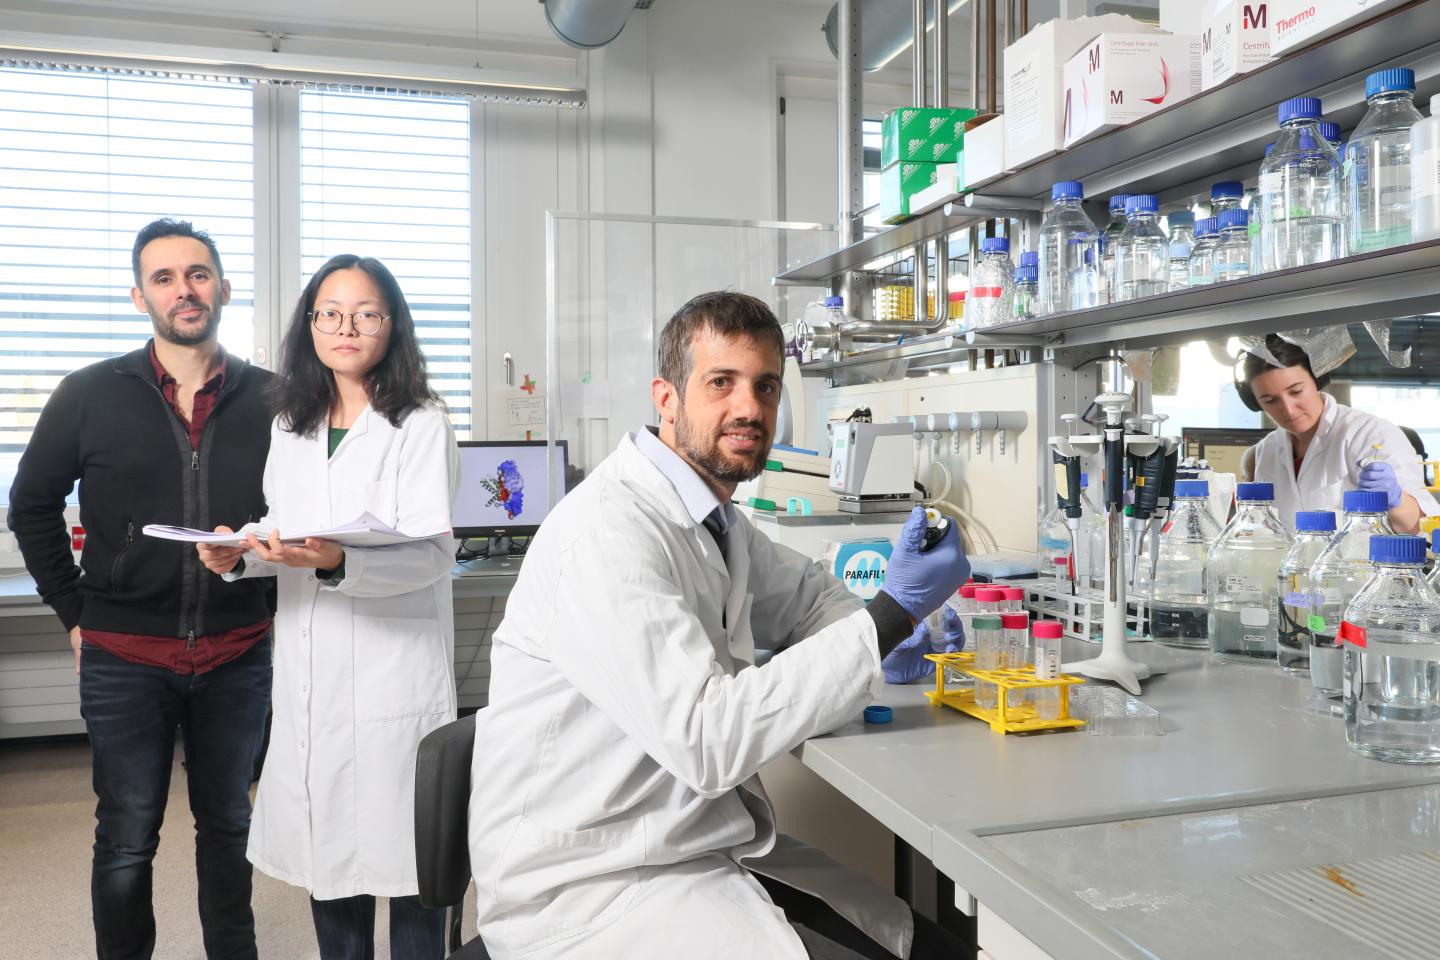 Researchers Working in Their Lab